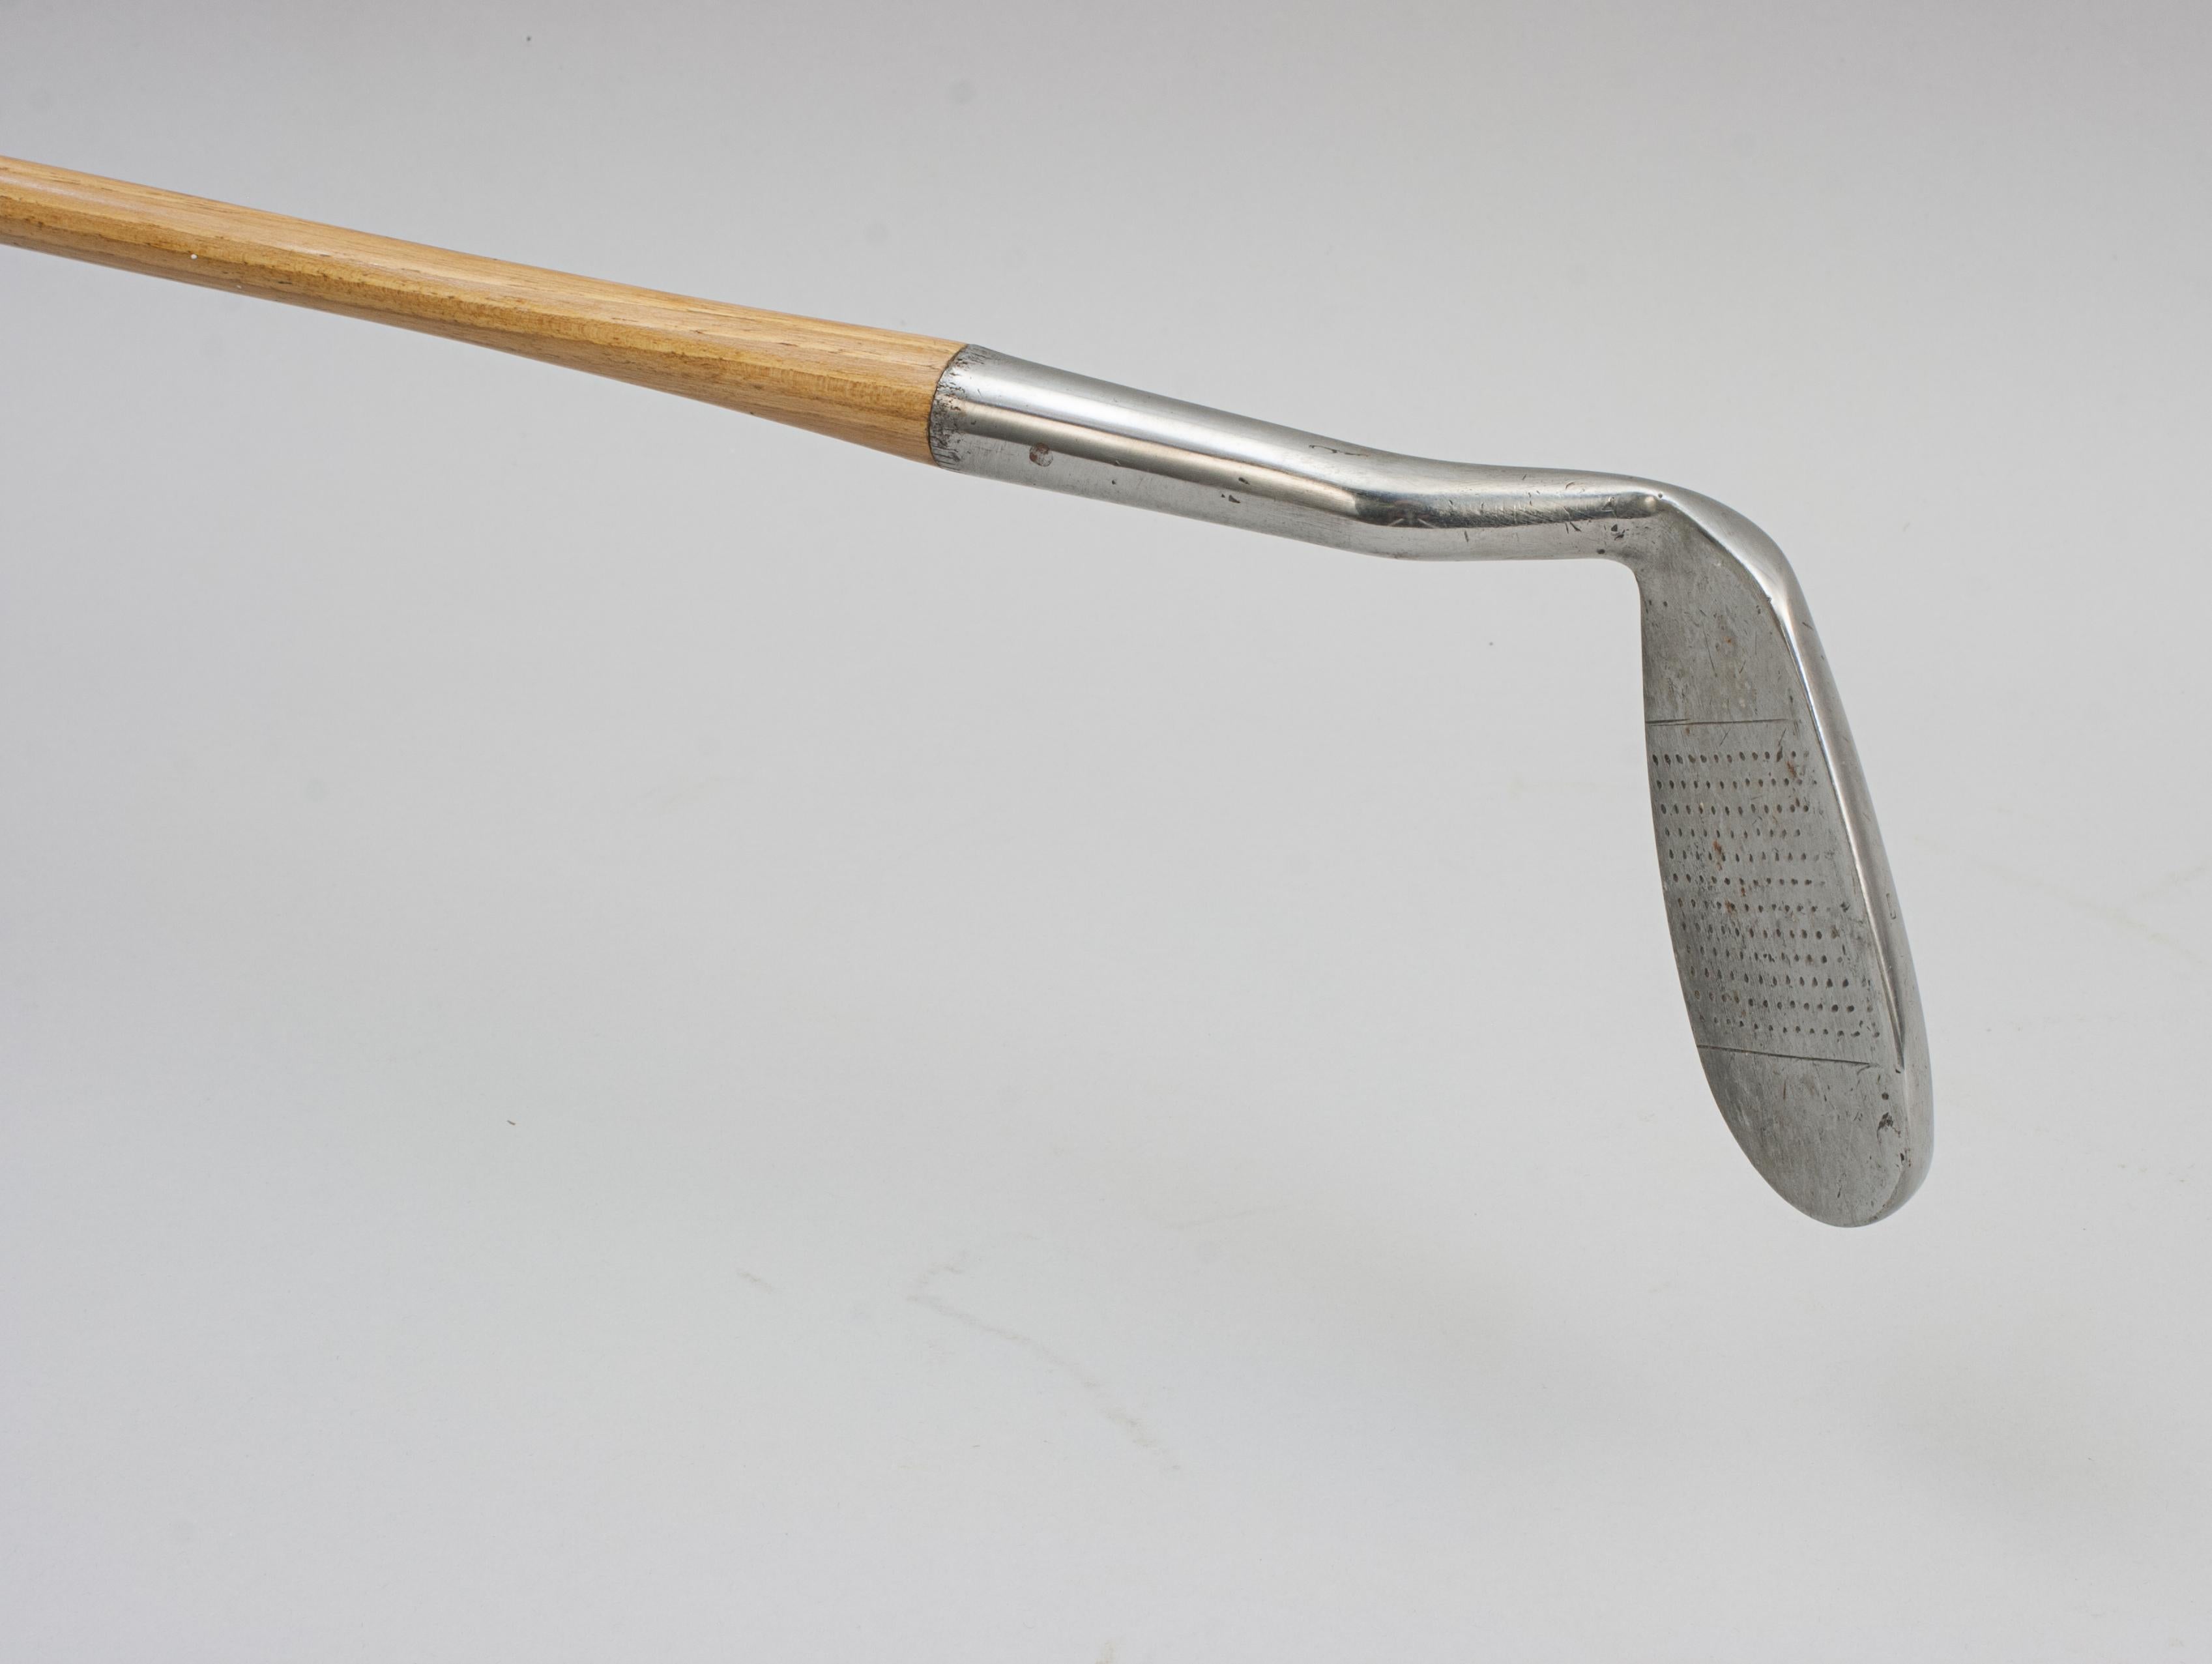 Vintage Anti Shank Golf Club In Good Condition For Sale In Oxfordshire, GB